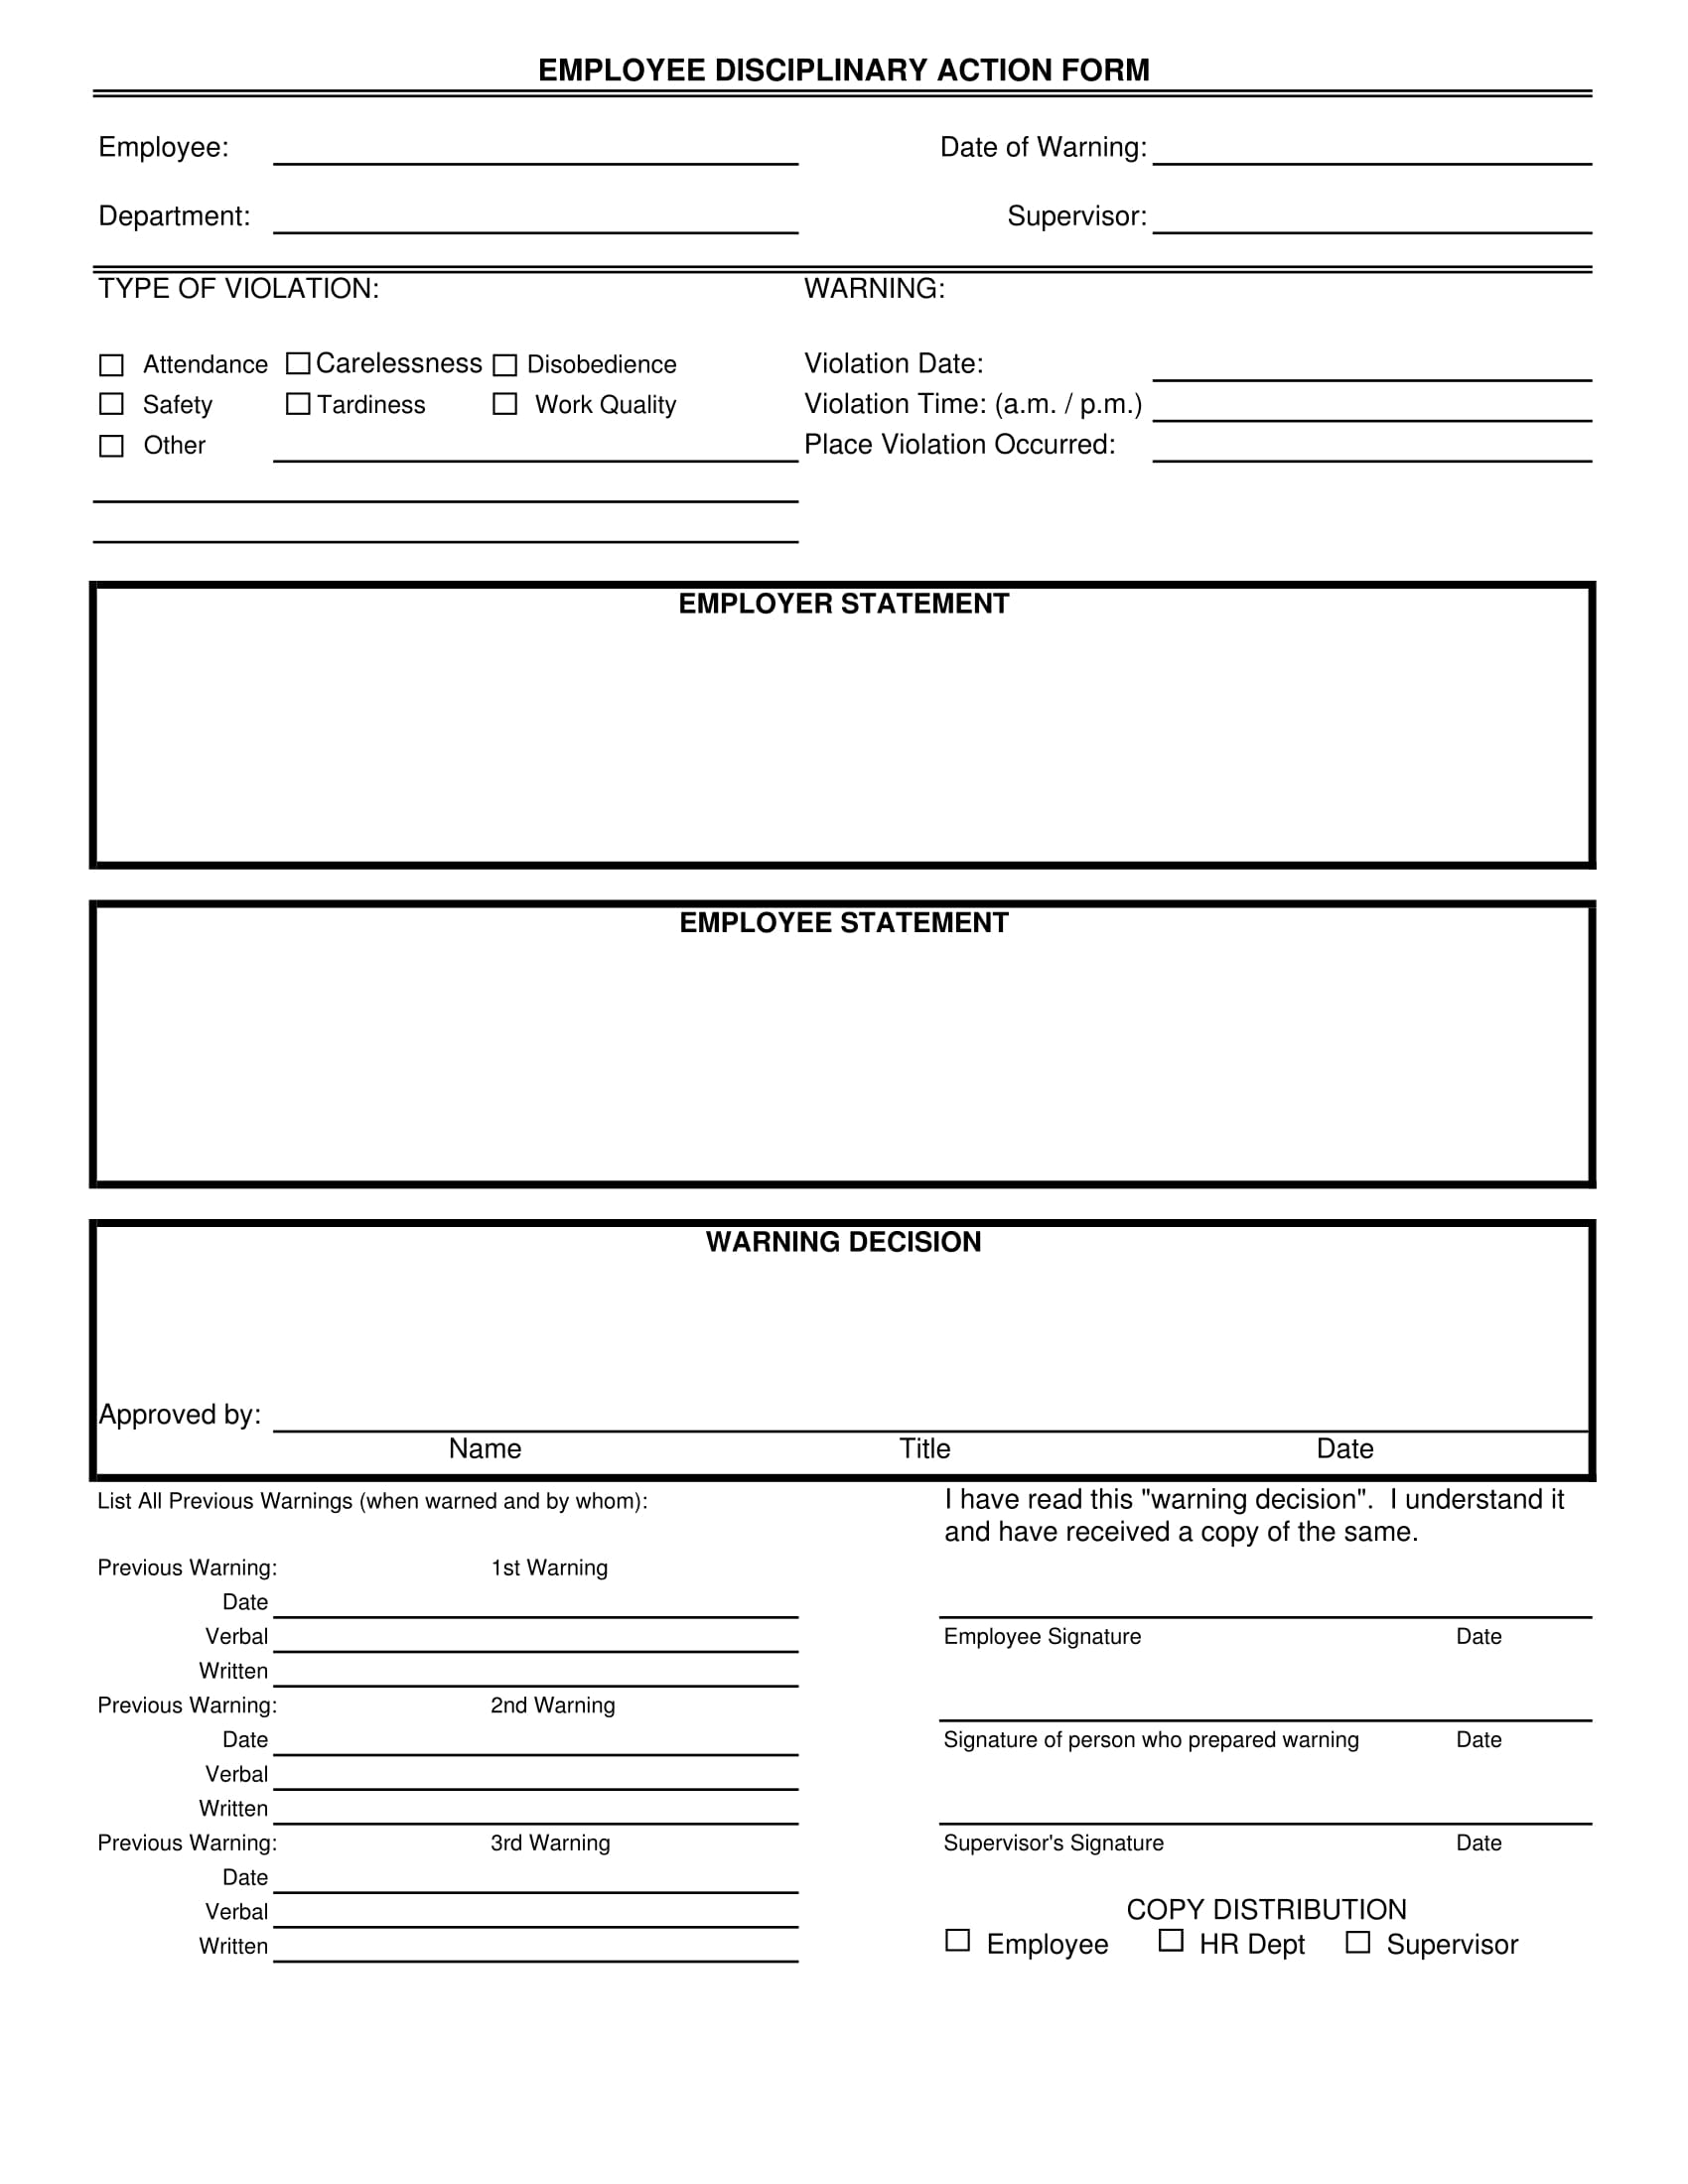 employee disciplinary action form 1